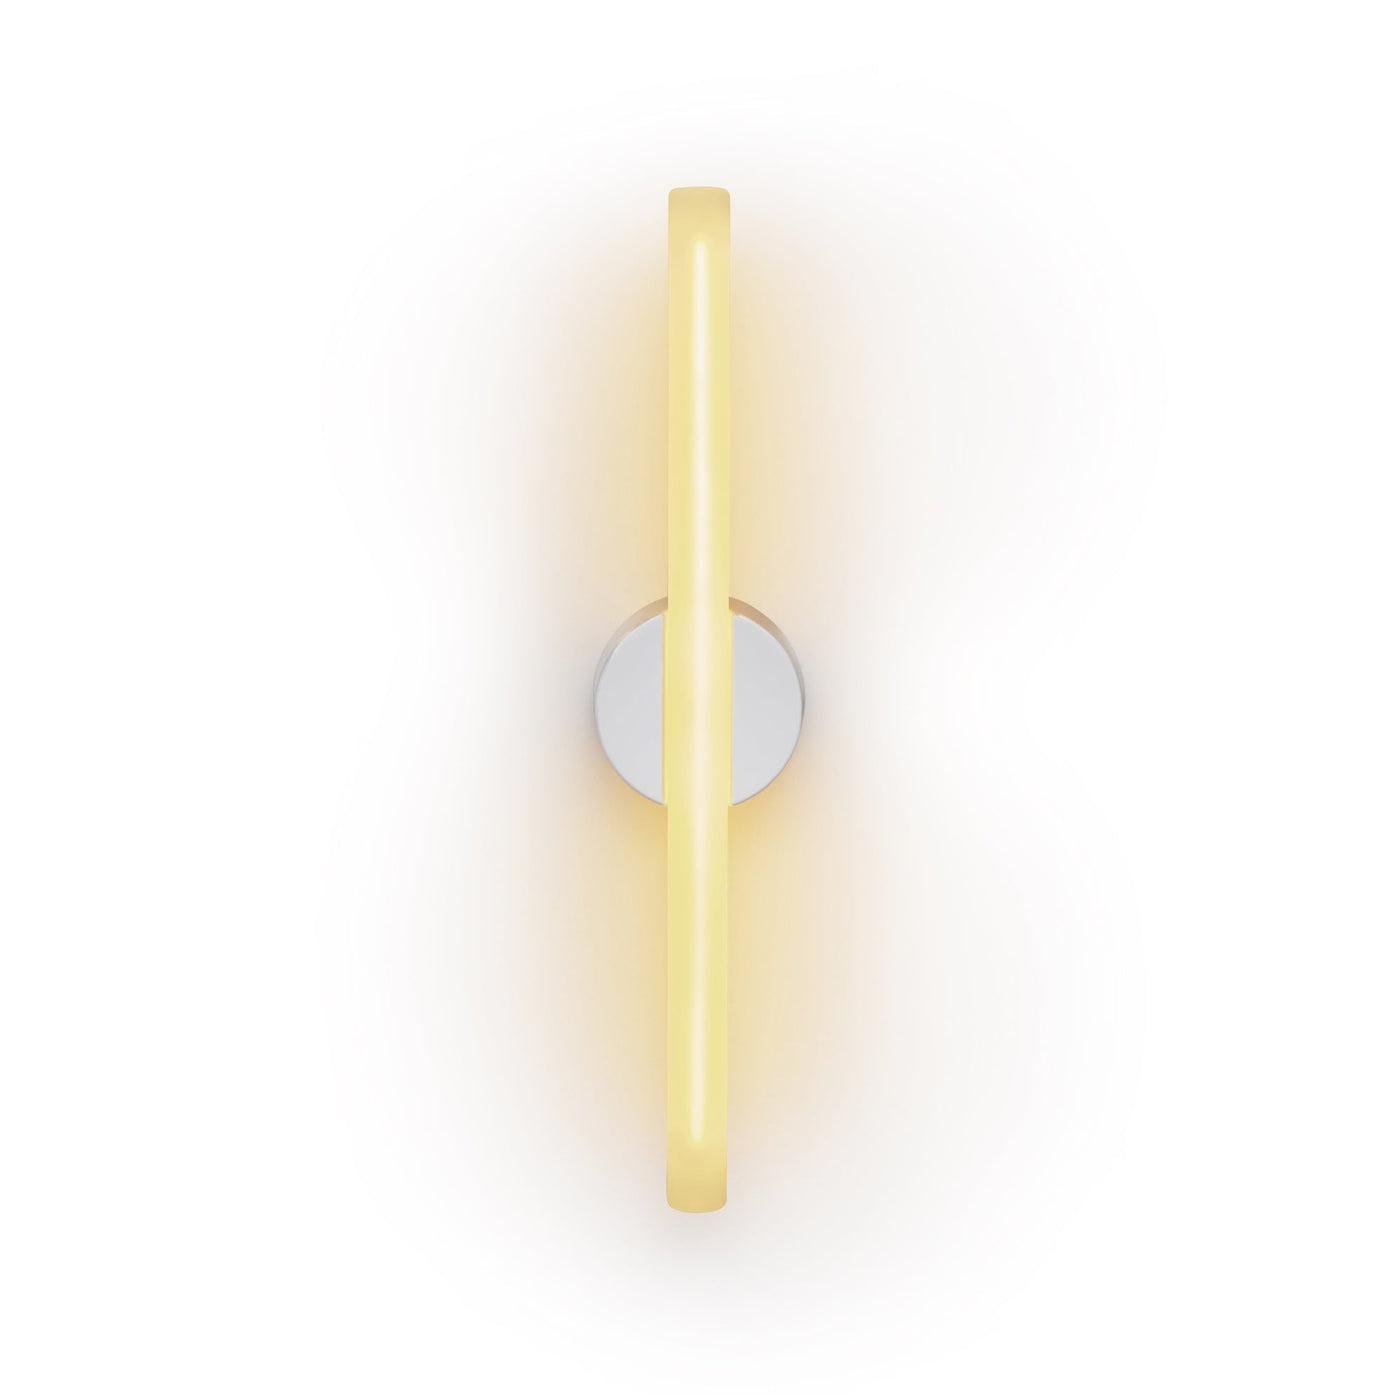 The Tala Kilter Wall Light has an IP44 rating and is ideal as bathroom light and outdoor lighting. #bulb-length_50cm